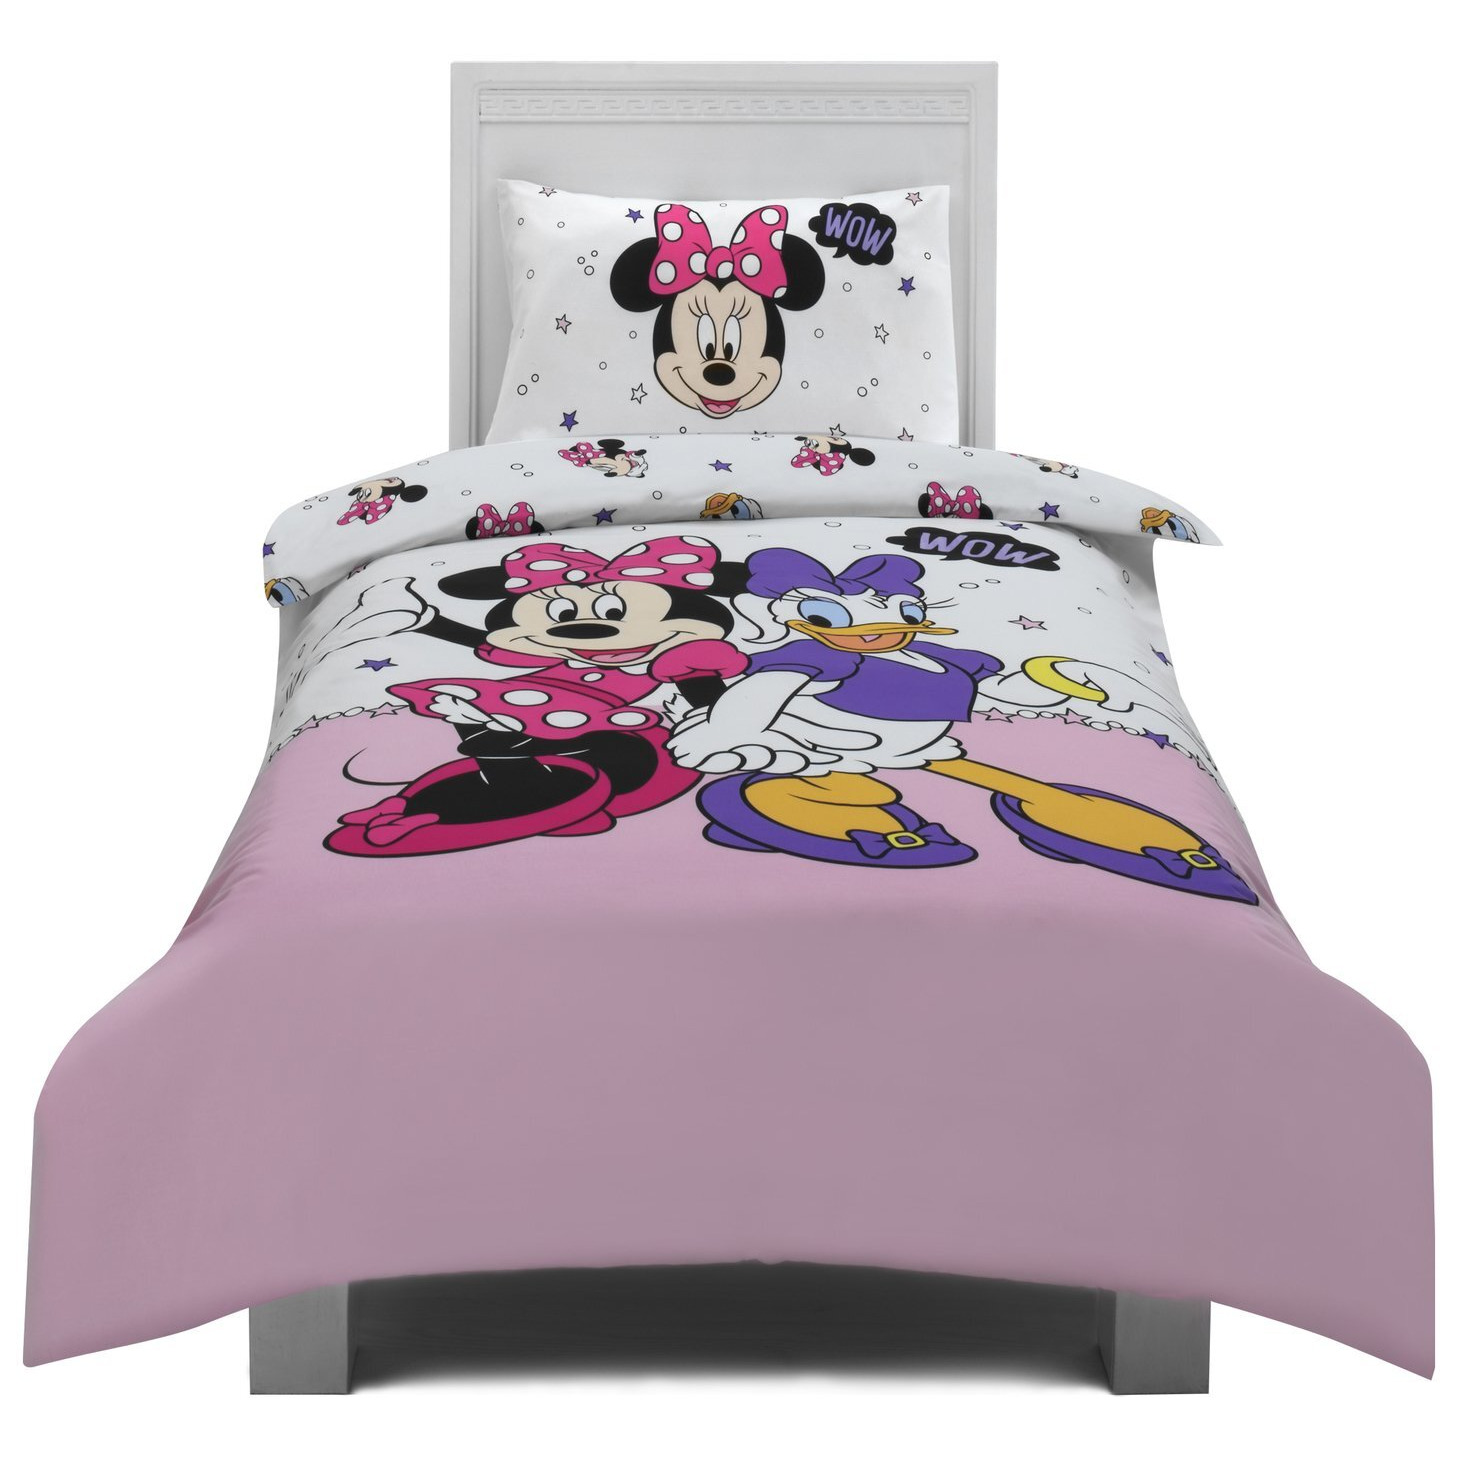 Minnie Mouse Kids Pink and White Bedding Set - Single - image 1